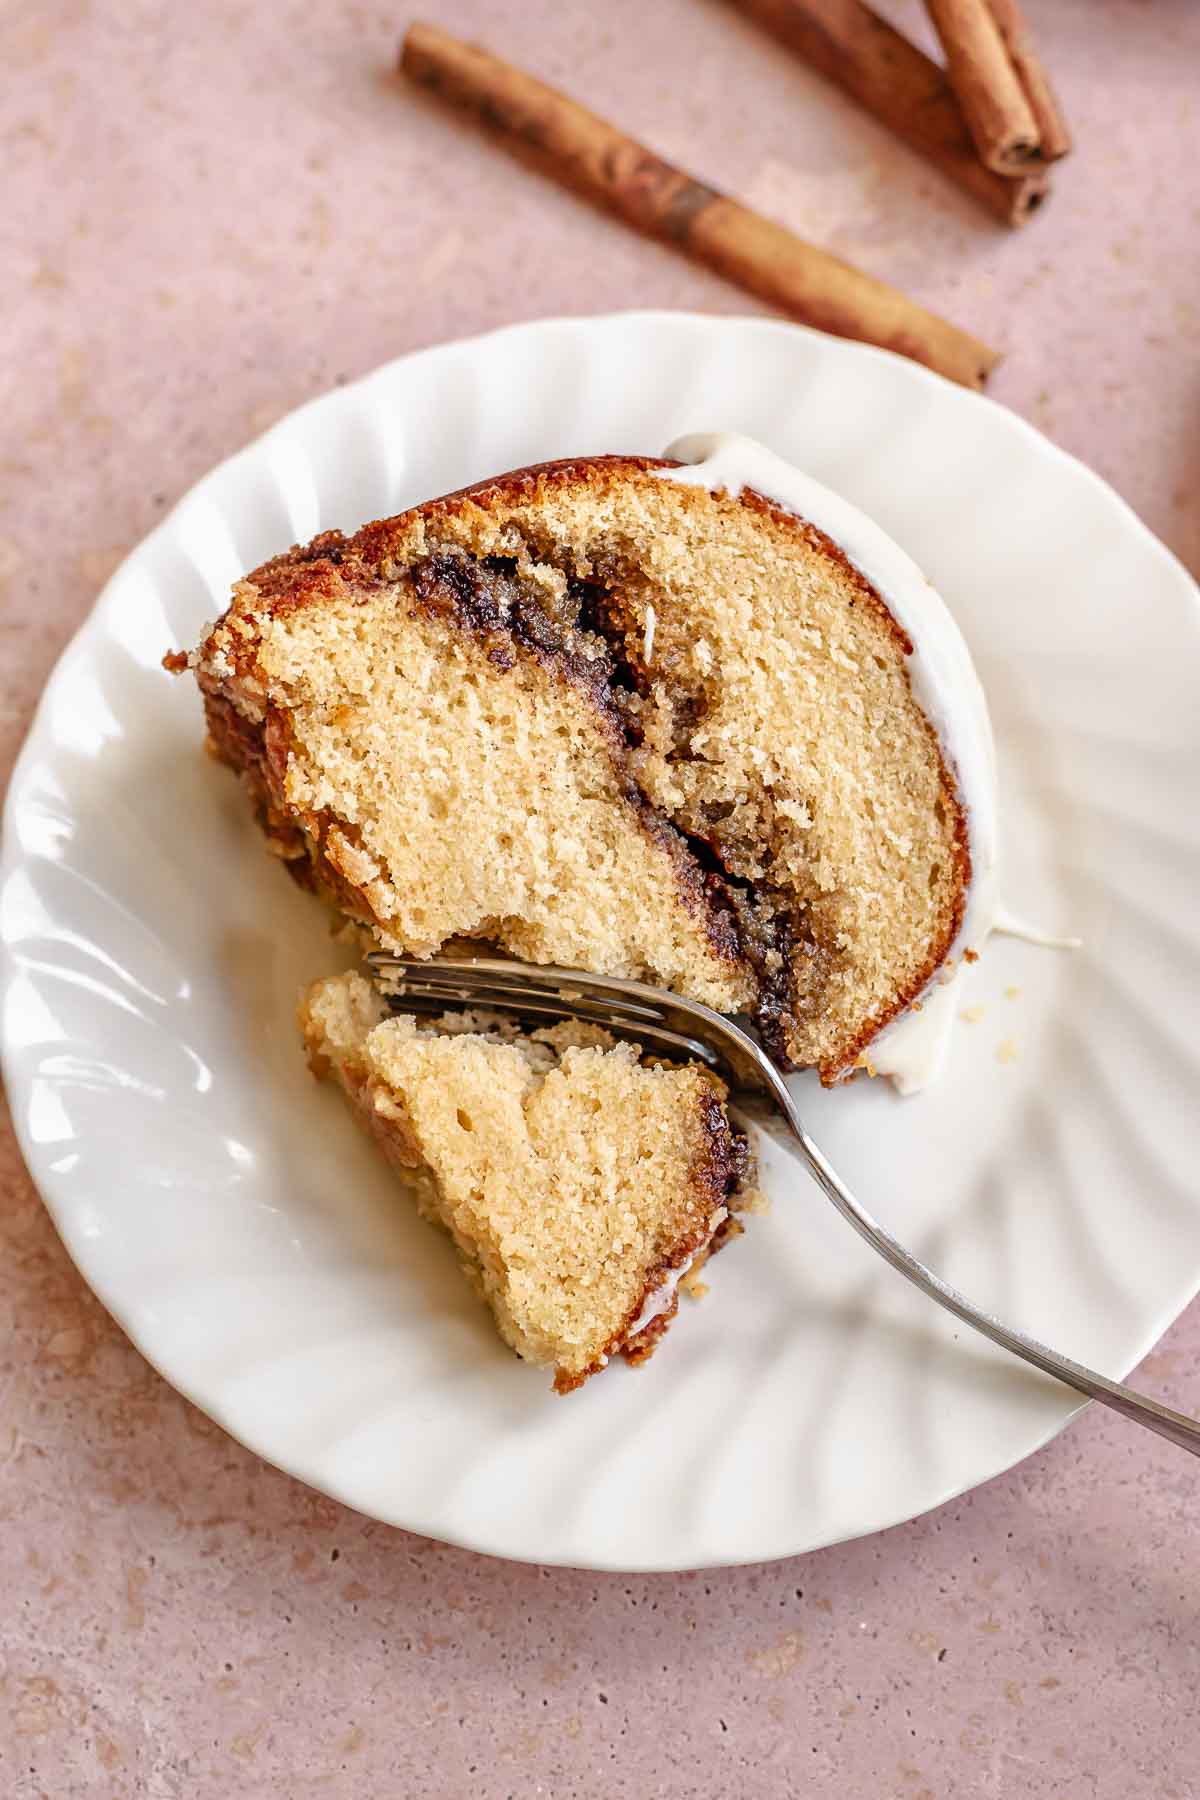 A piece of cinnamon bundt cake on a plate with a fork cutting into it.